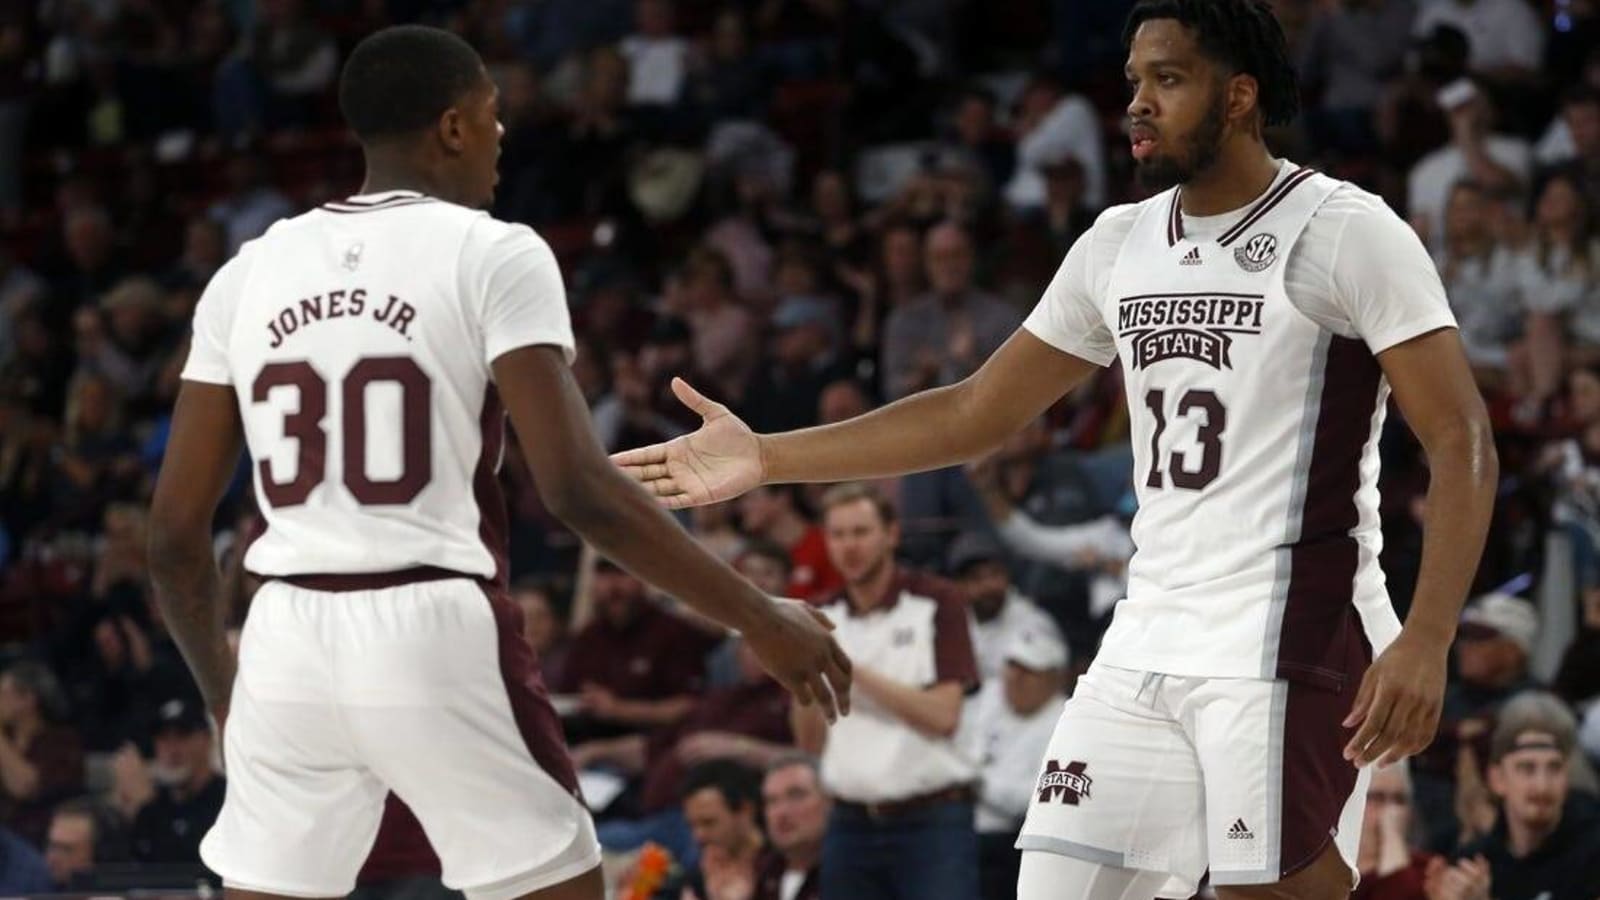 Mississippi State deals LSU its 11th straight defeat